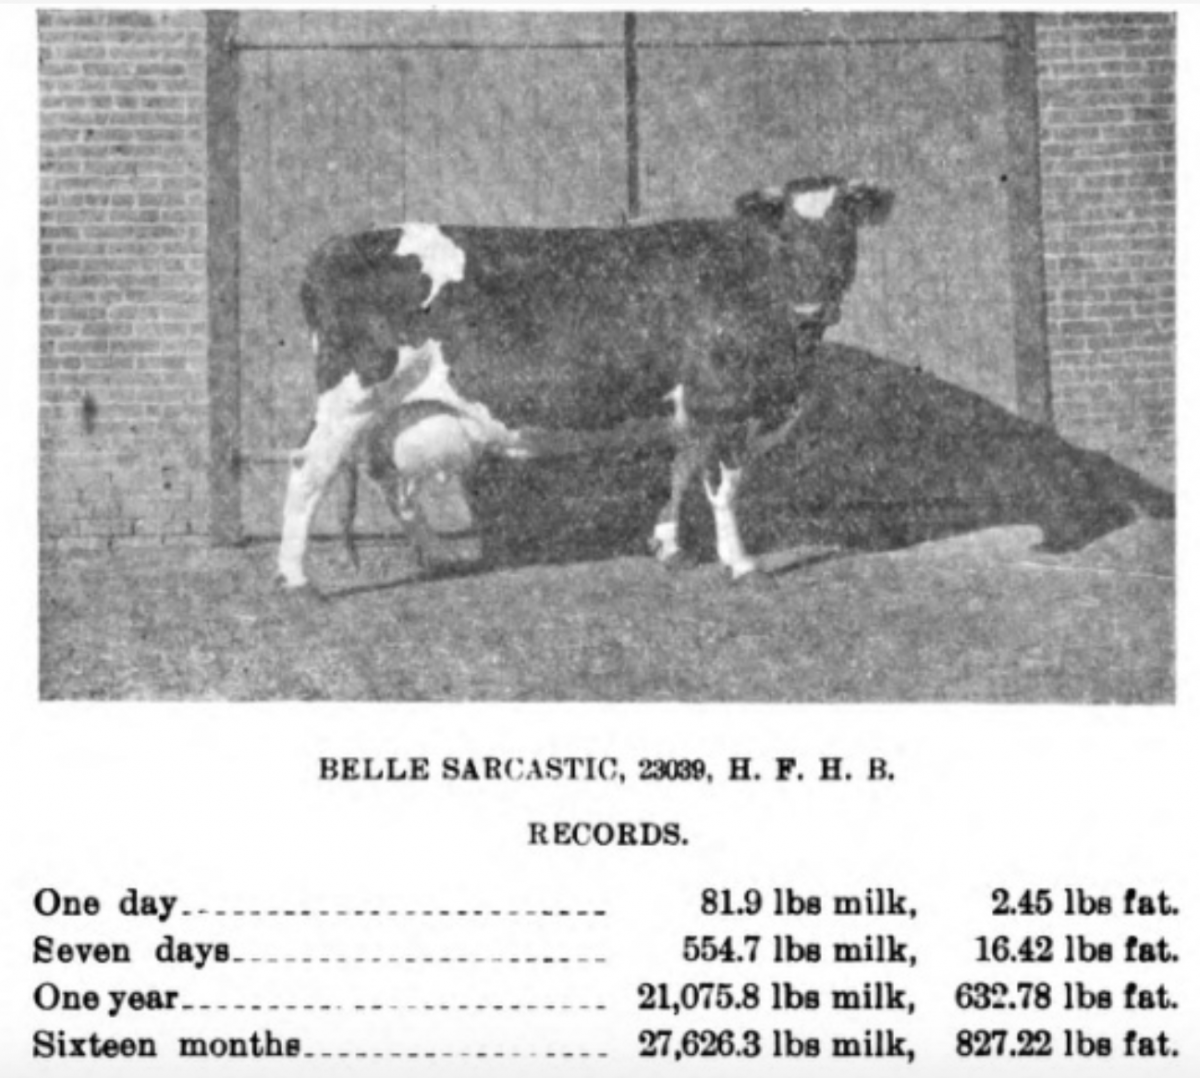 Belle Sarcastic, cow" title="Belle Sarcastic, the record holding milk producer. Annual report of the Agricultural Experiment Station, Michigan State University. Vol. 9, 1896